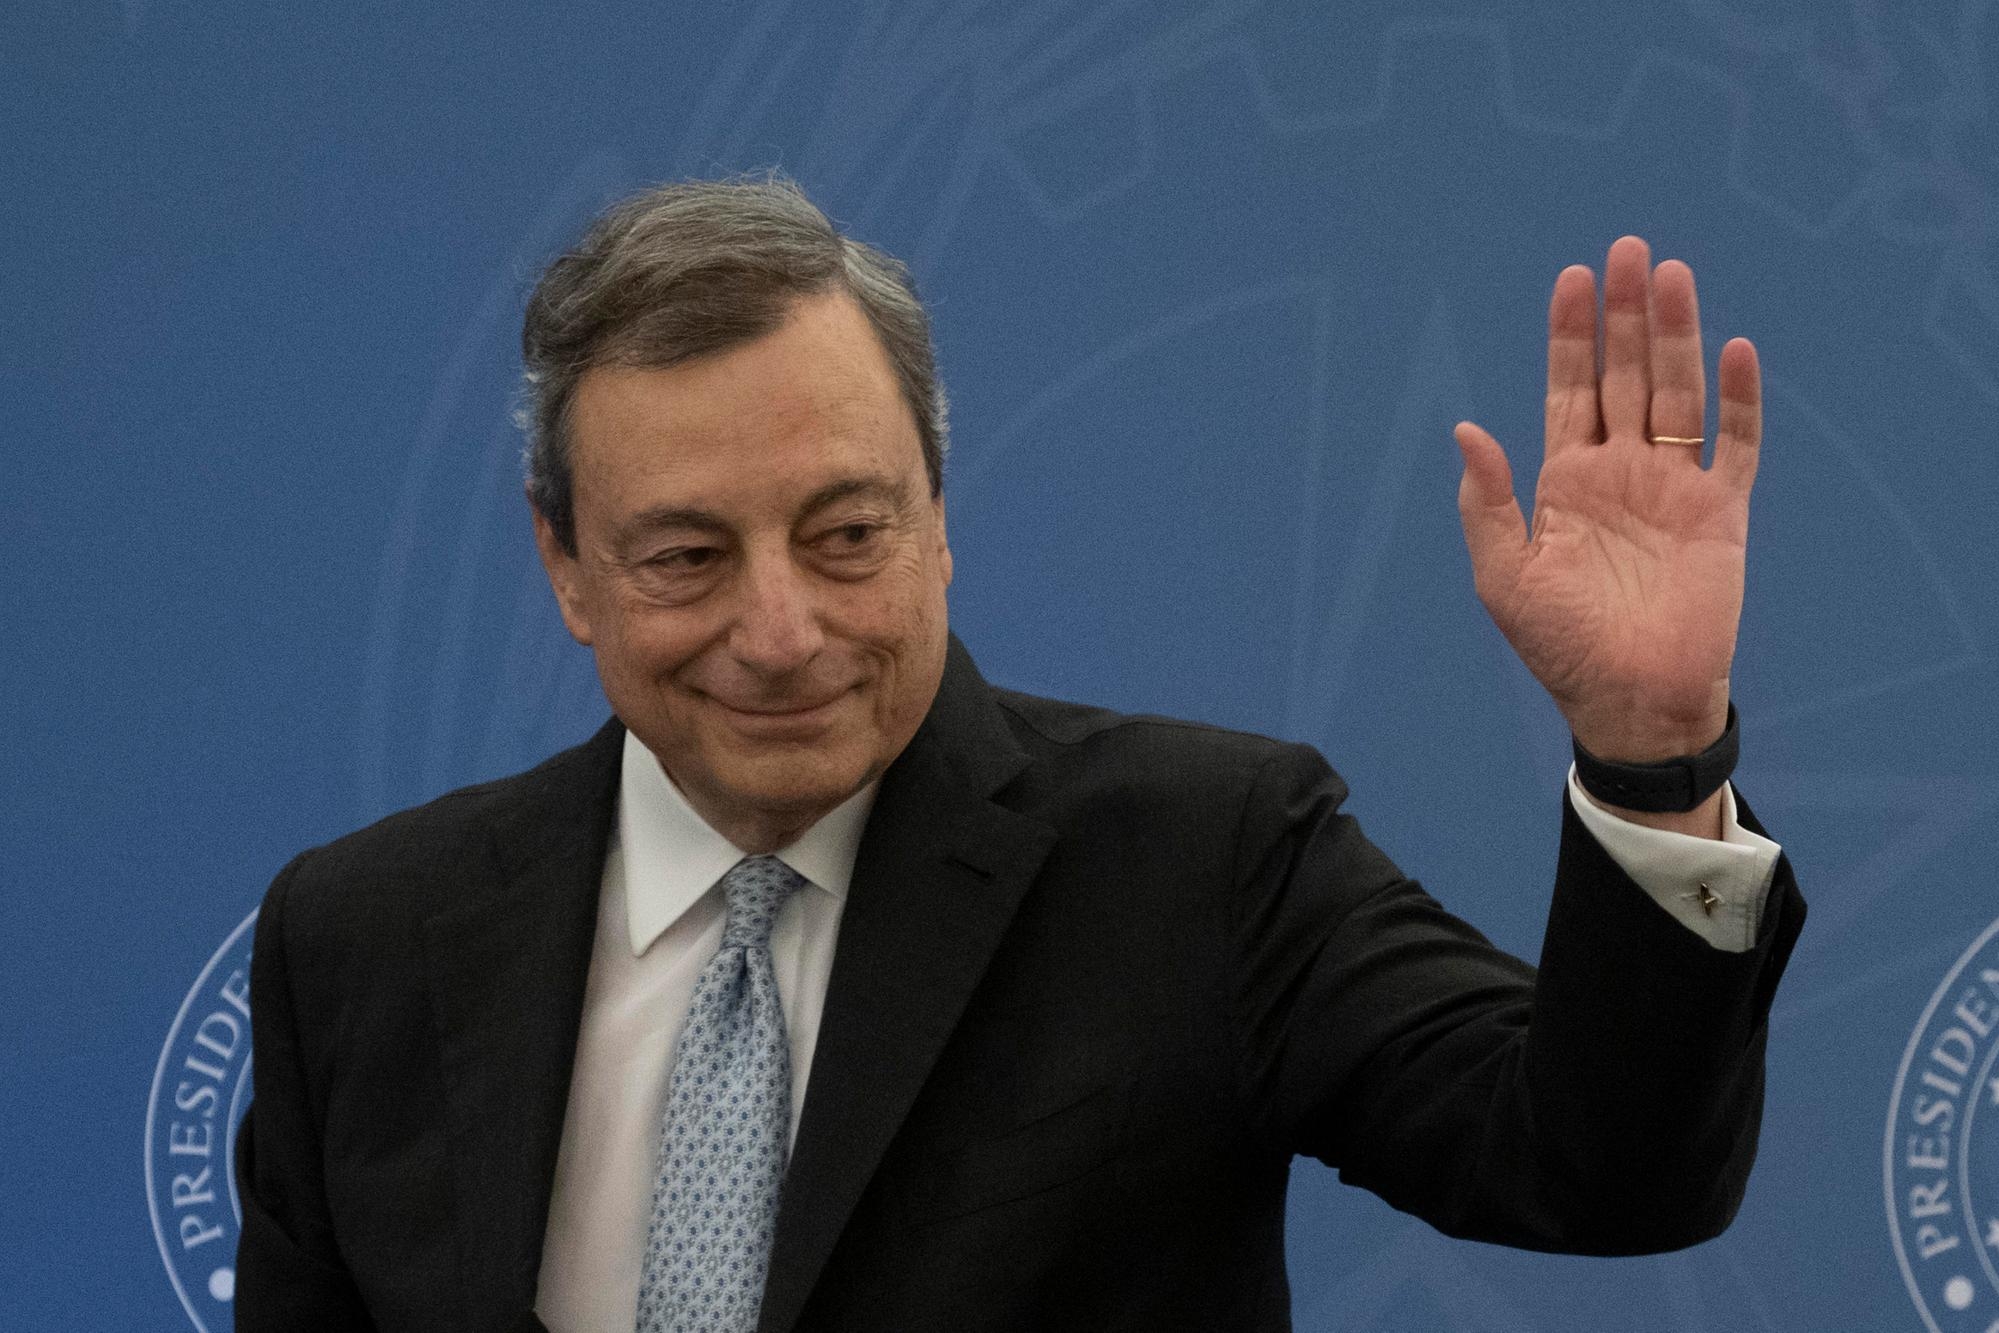 Italian premier Mario Draghi, during the press conference at the end of the Council of Ministers in Rome, 30 June 2022. ANSA/MAURIZIO BRAMBATTI